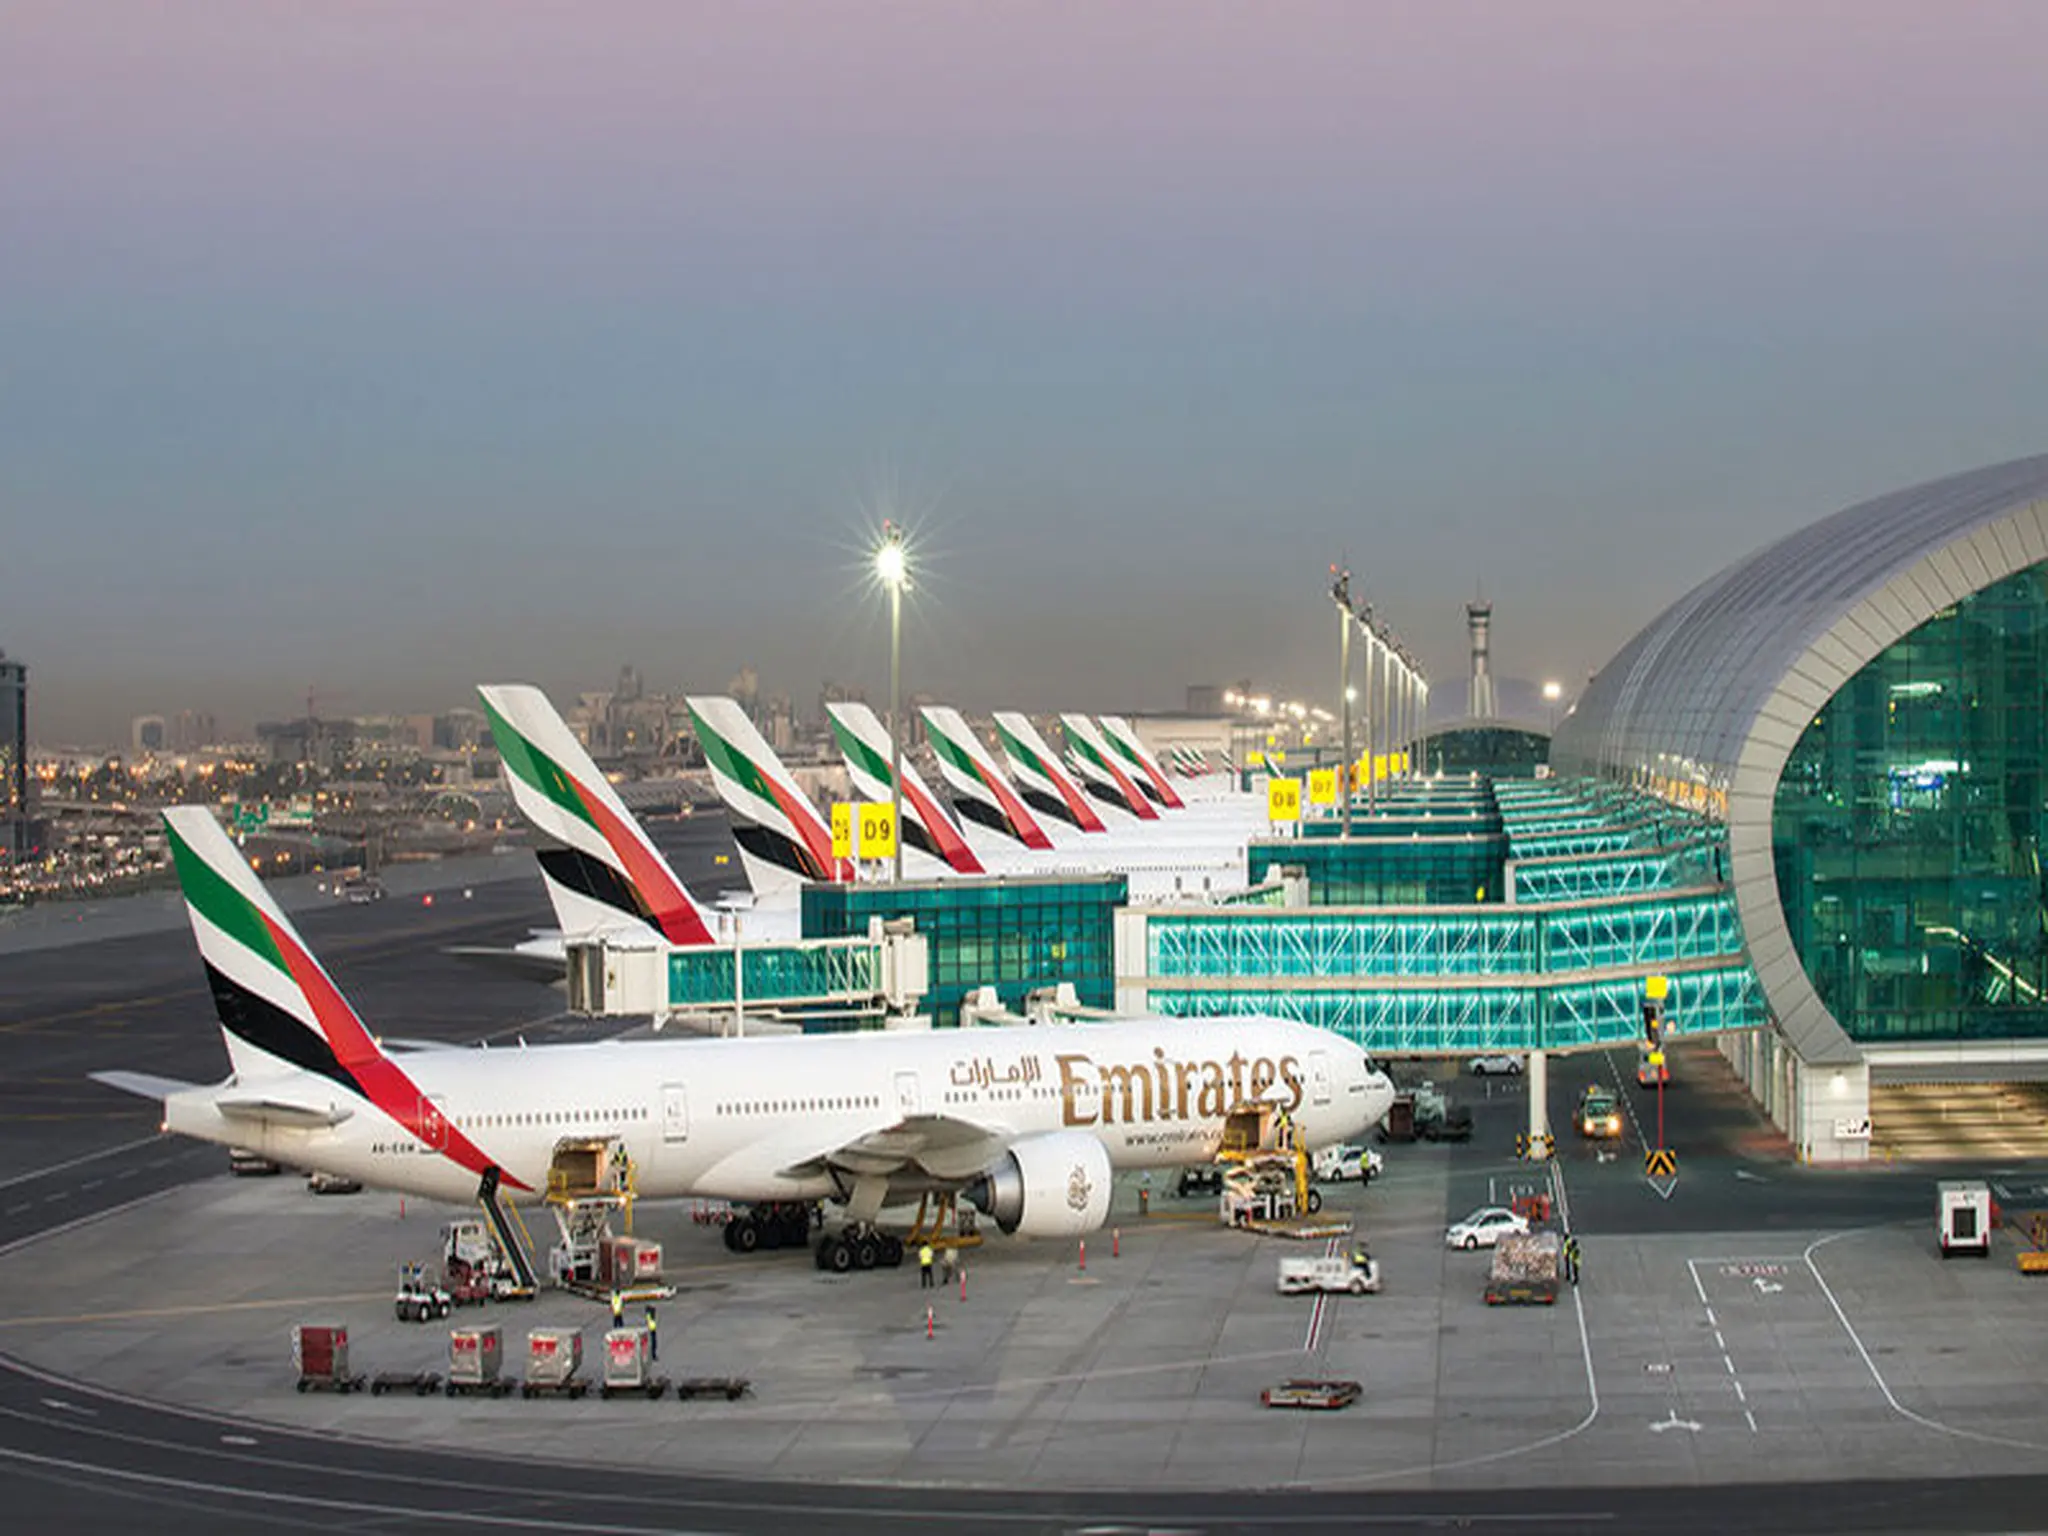 Emirates Airlines is preparing for the large numbers of arrivals from abroad through Dubai Airport next month